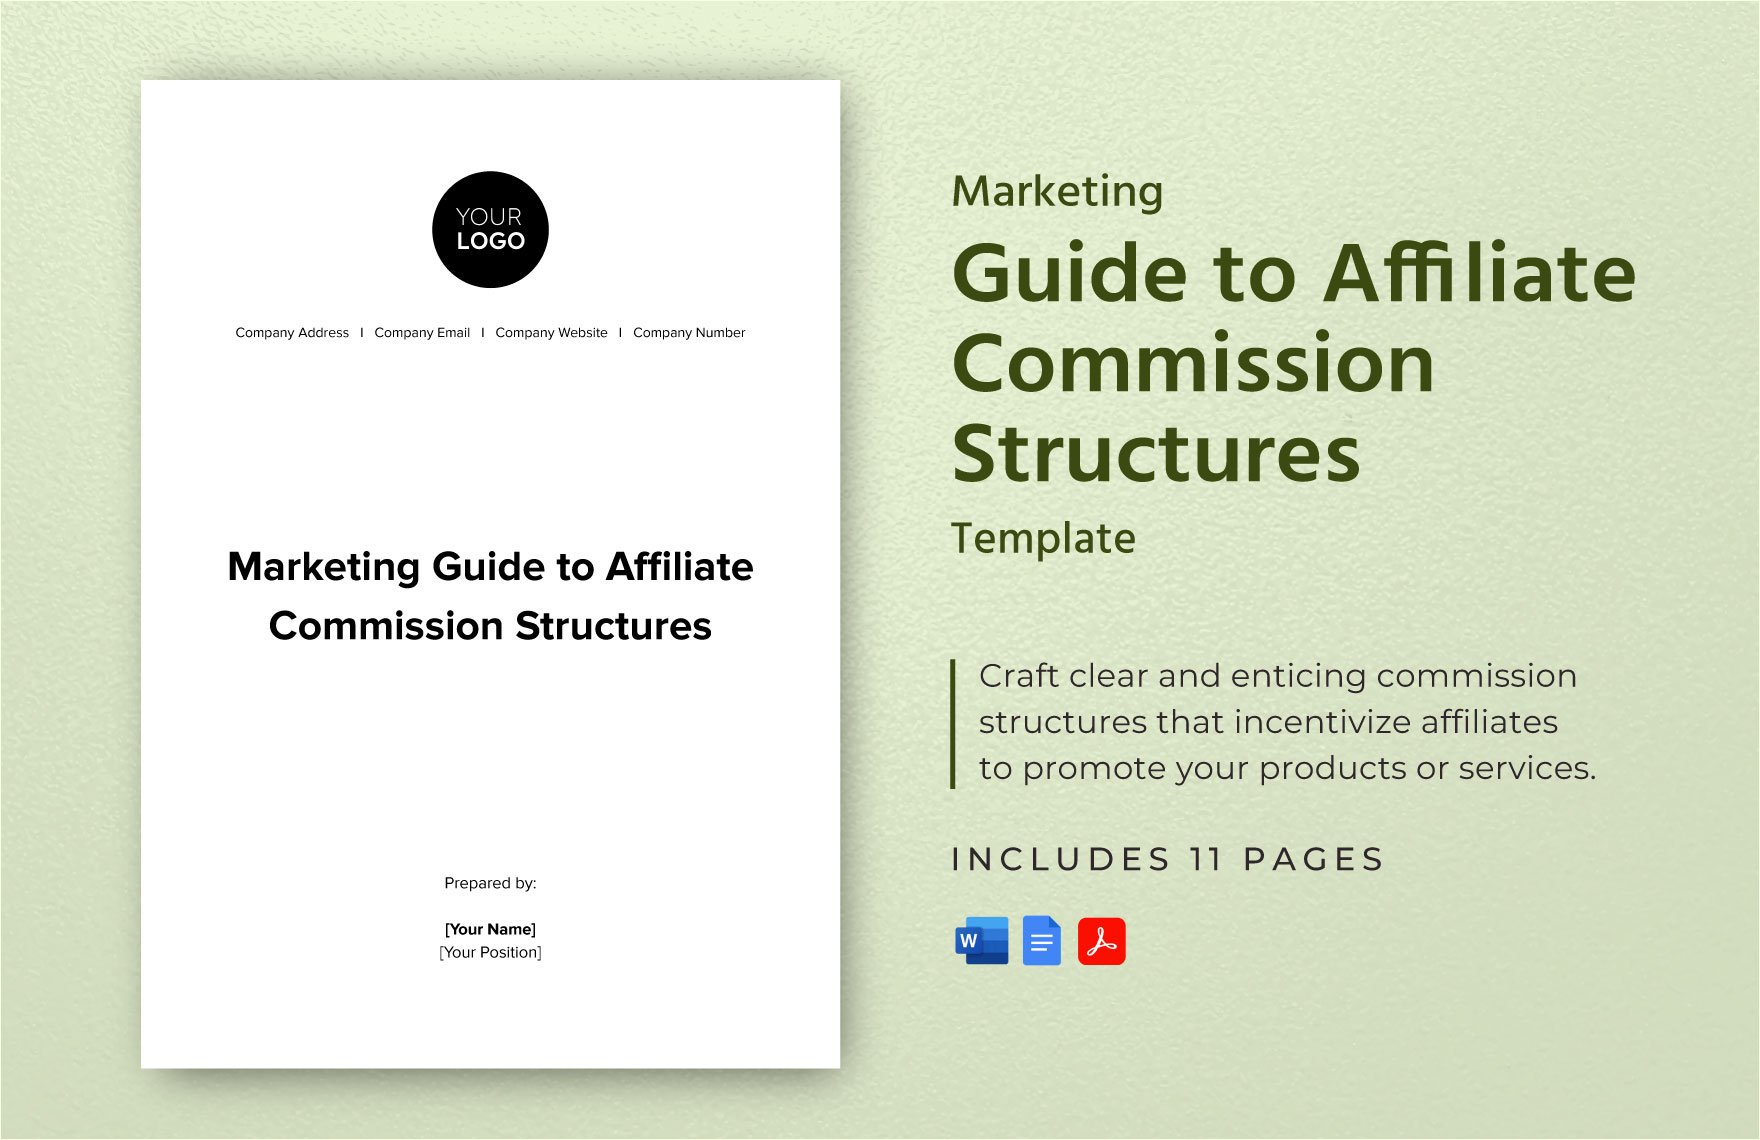 Marketing Guide to Affiliate Commission Structures Template in Word, Google Docs, PDF